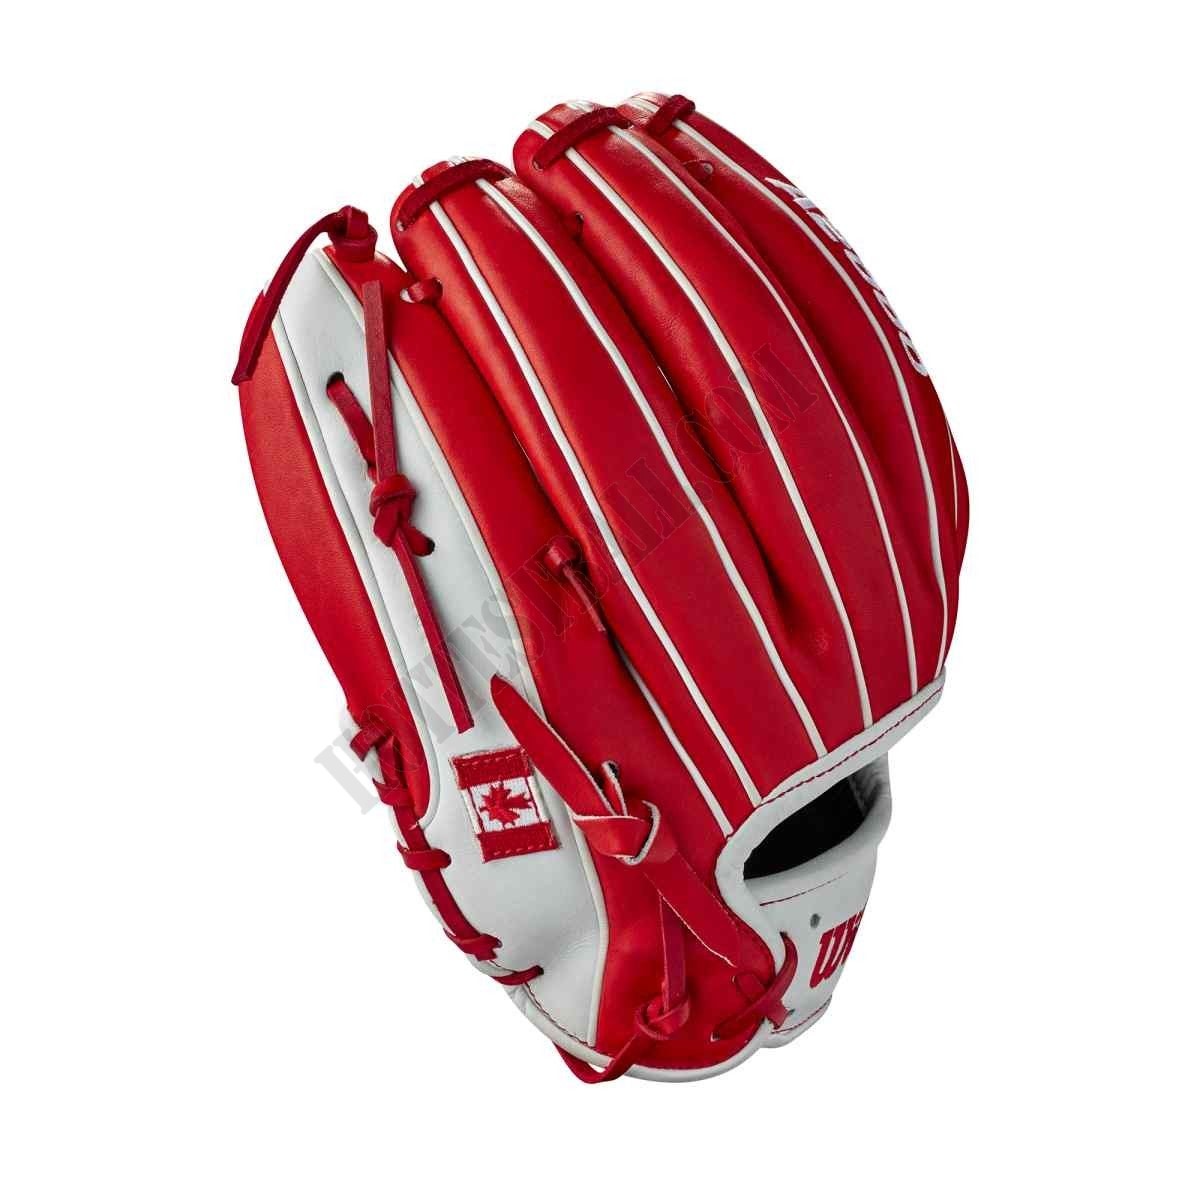 2021 A2000 1786 Canada 11.5" Infield Baseball Glove - Limited Edition ● Wilson Promotions - -4